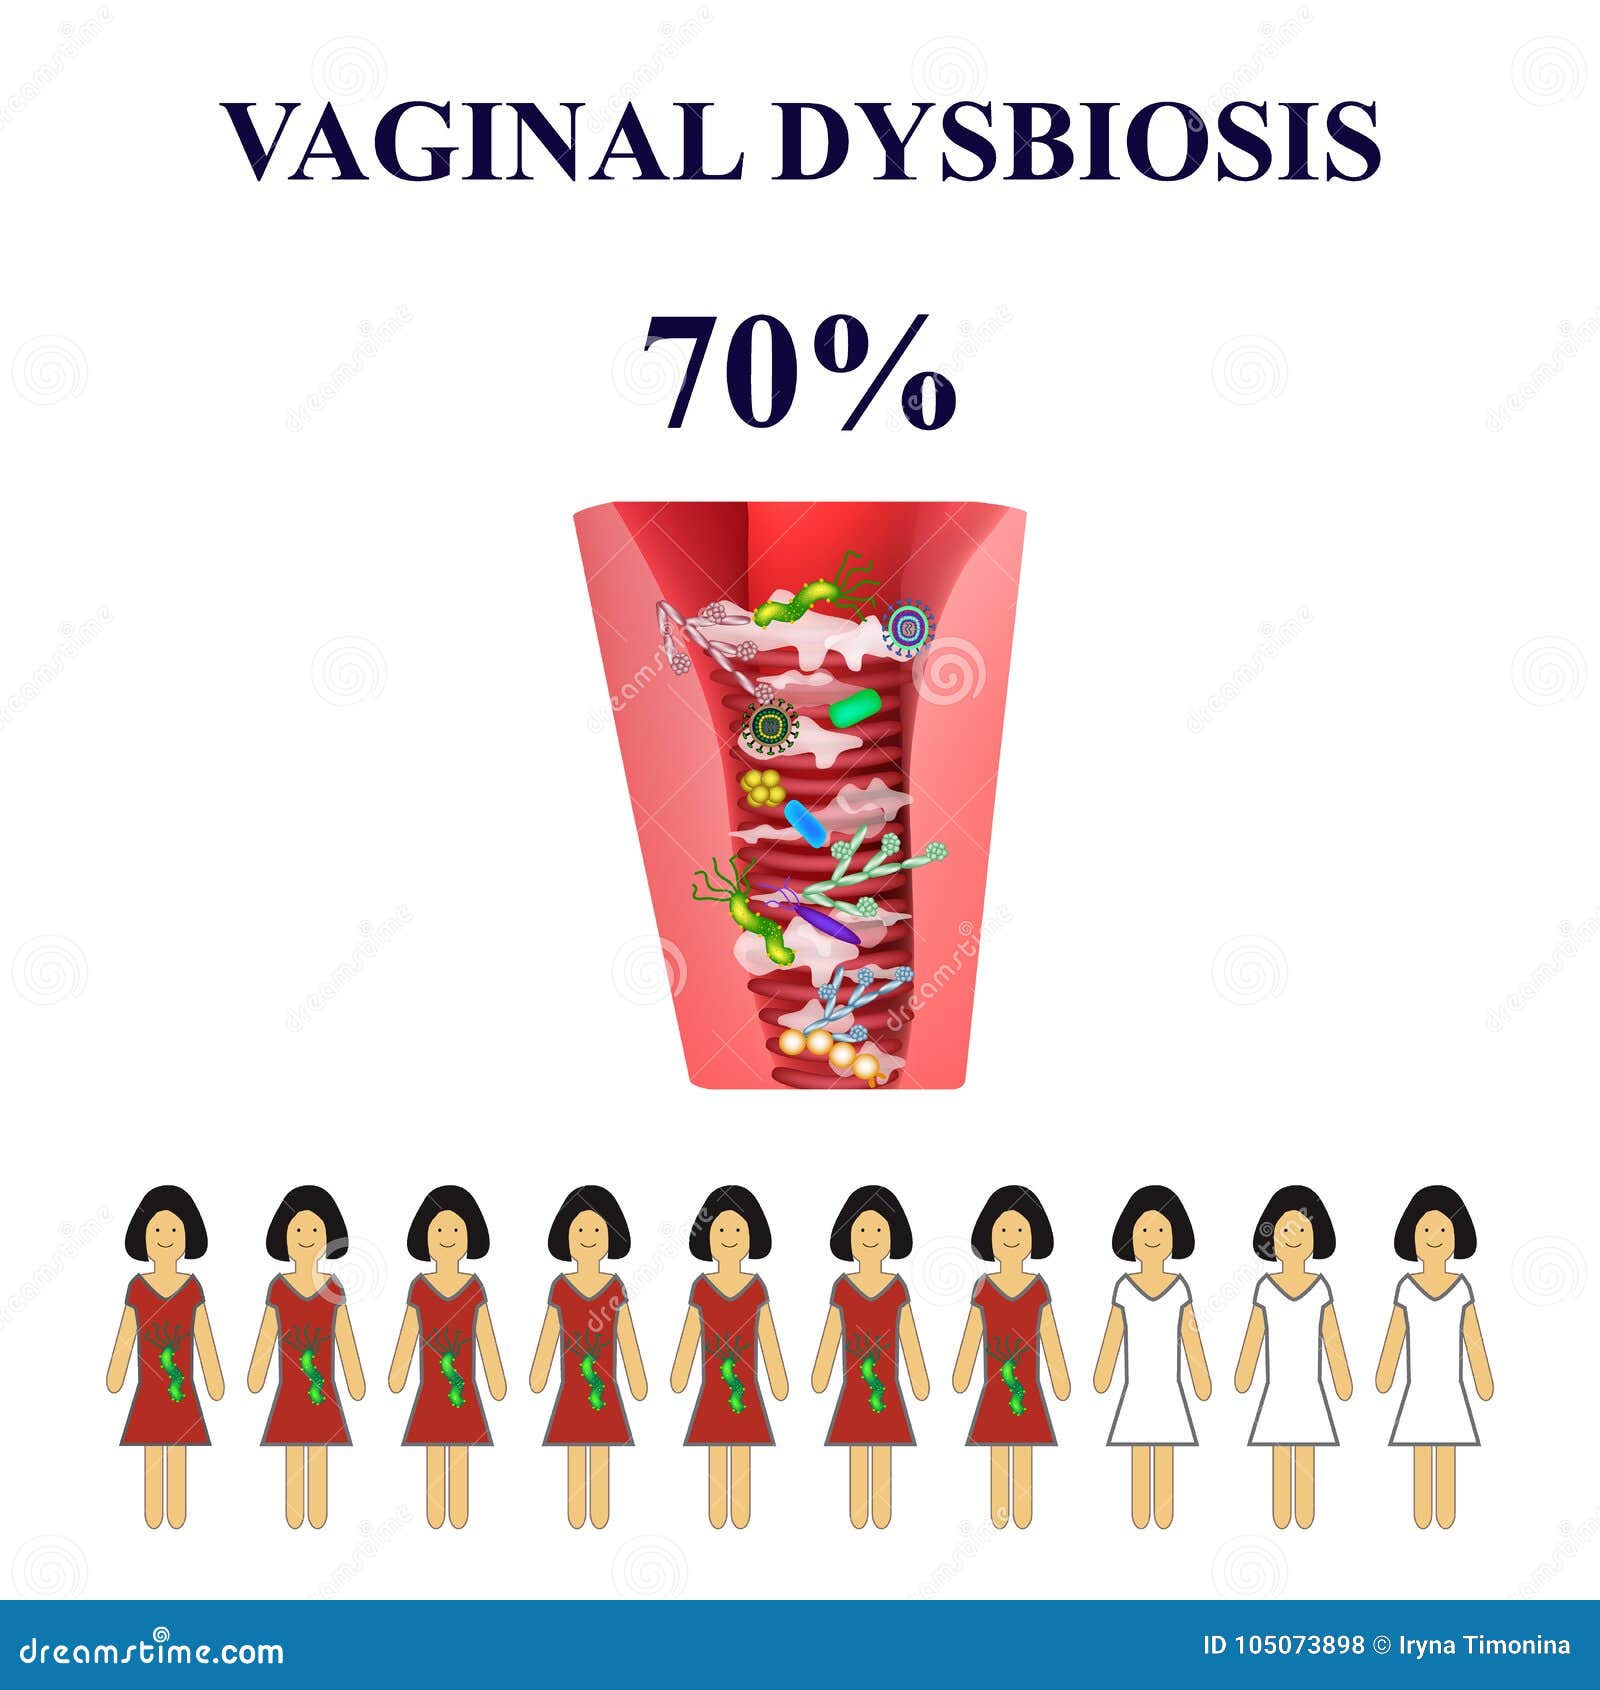 dysbacteriosis of the vagina. vaginitis. candidiasis. 70 percent of women are ill.